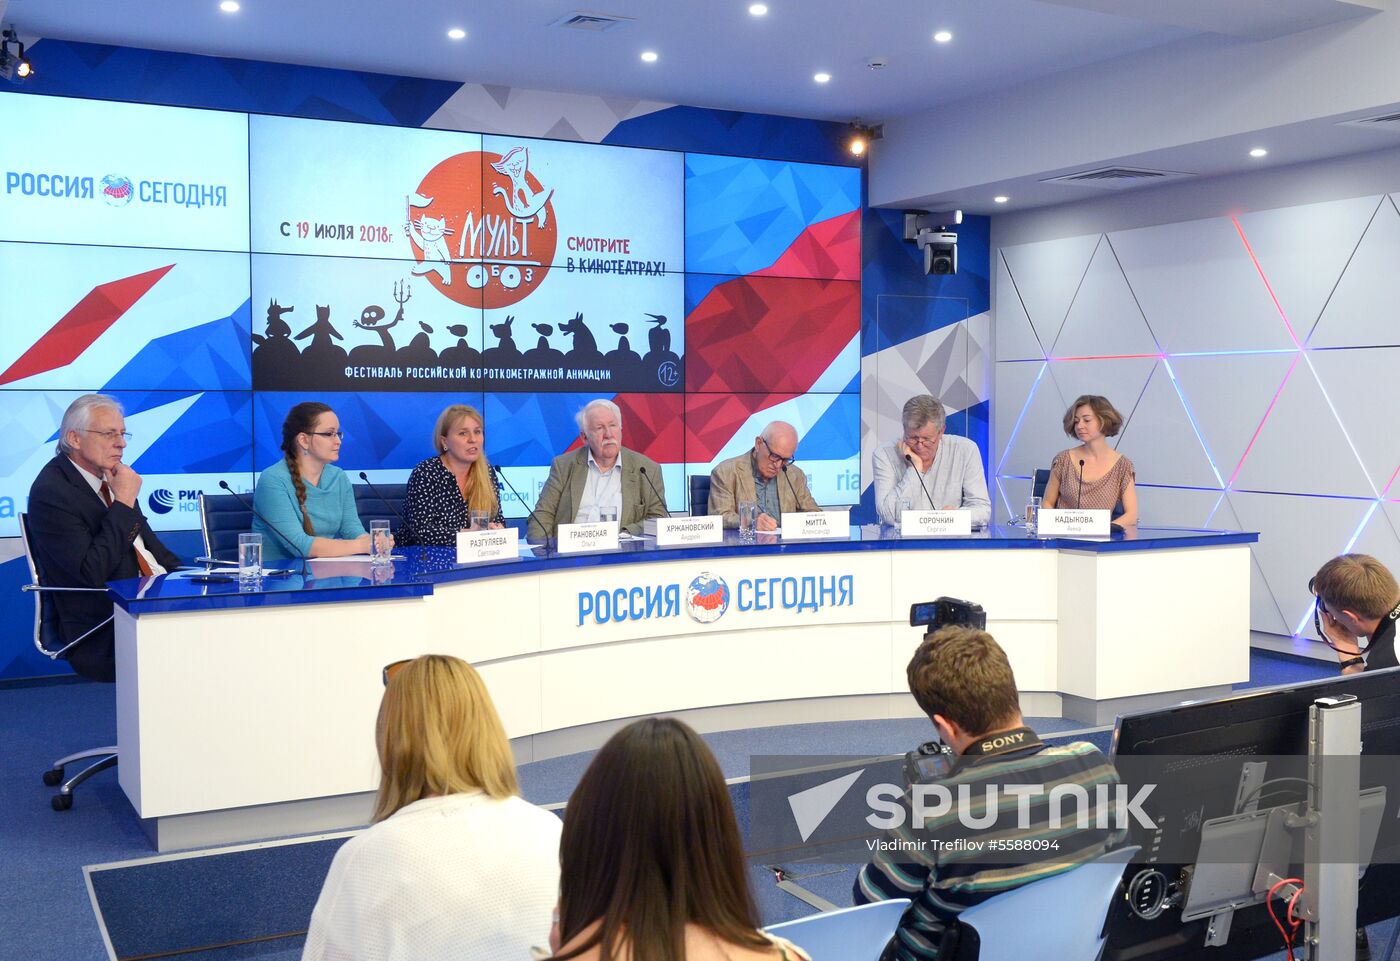 News conference ahead of Multoboz festival of Russian animated short film scheduled for July 19